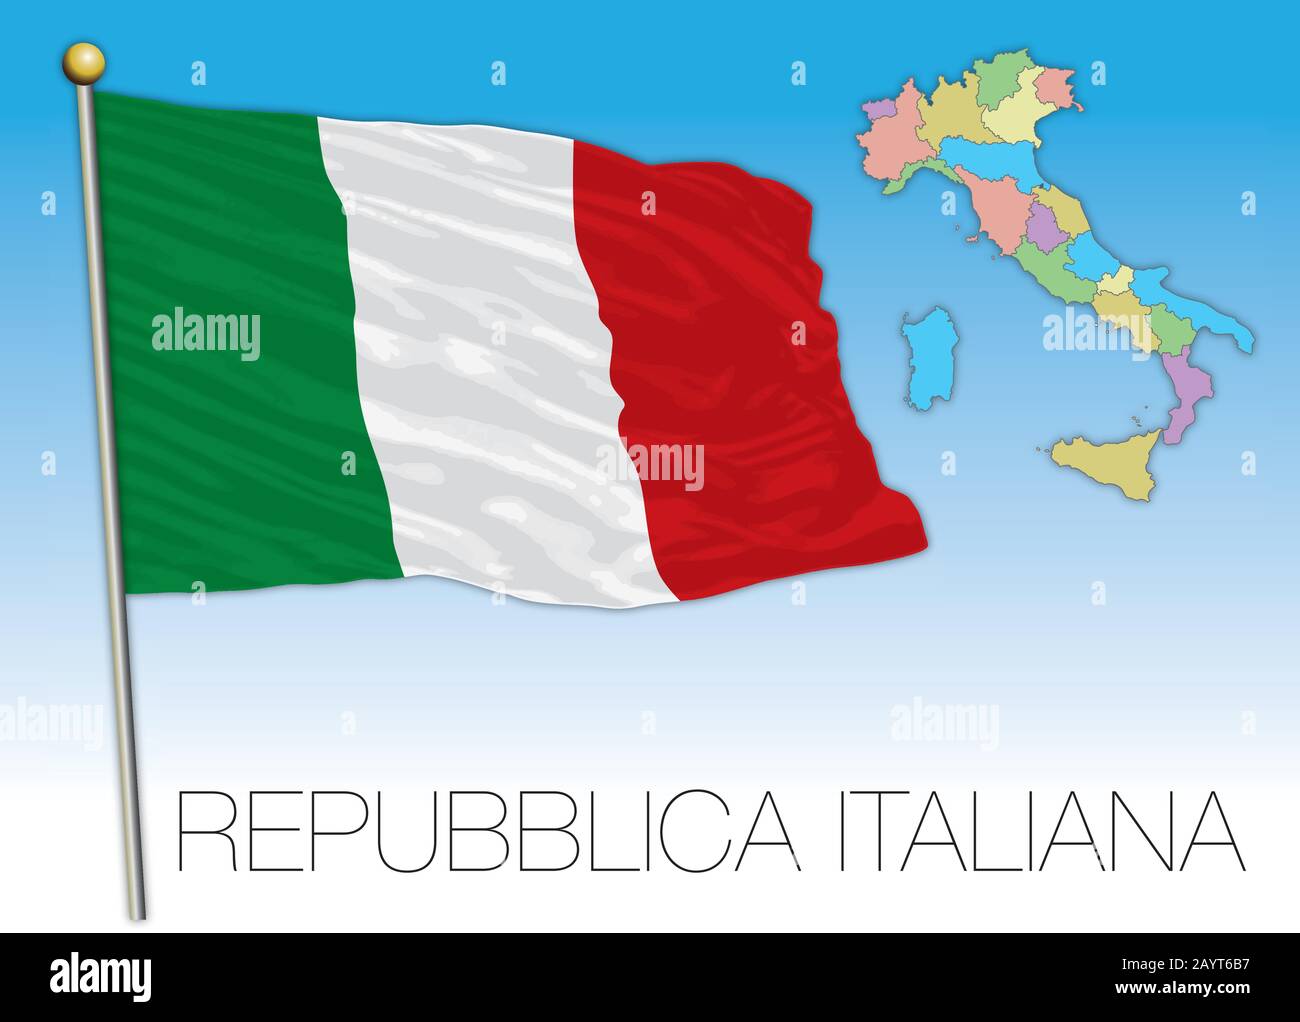 Italy Official National Flag And Regional Map European Union Vector Illustration 2AYT6B7 